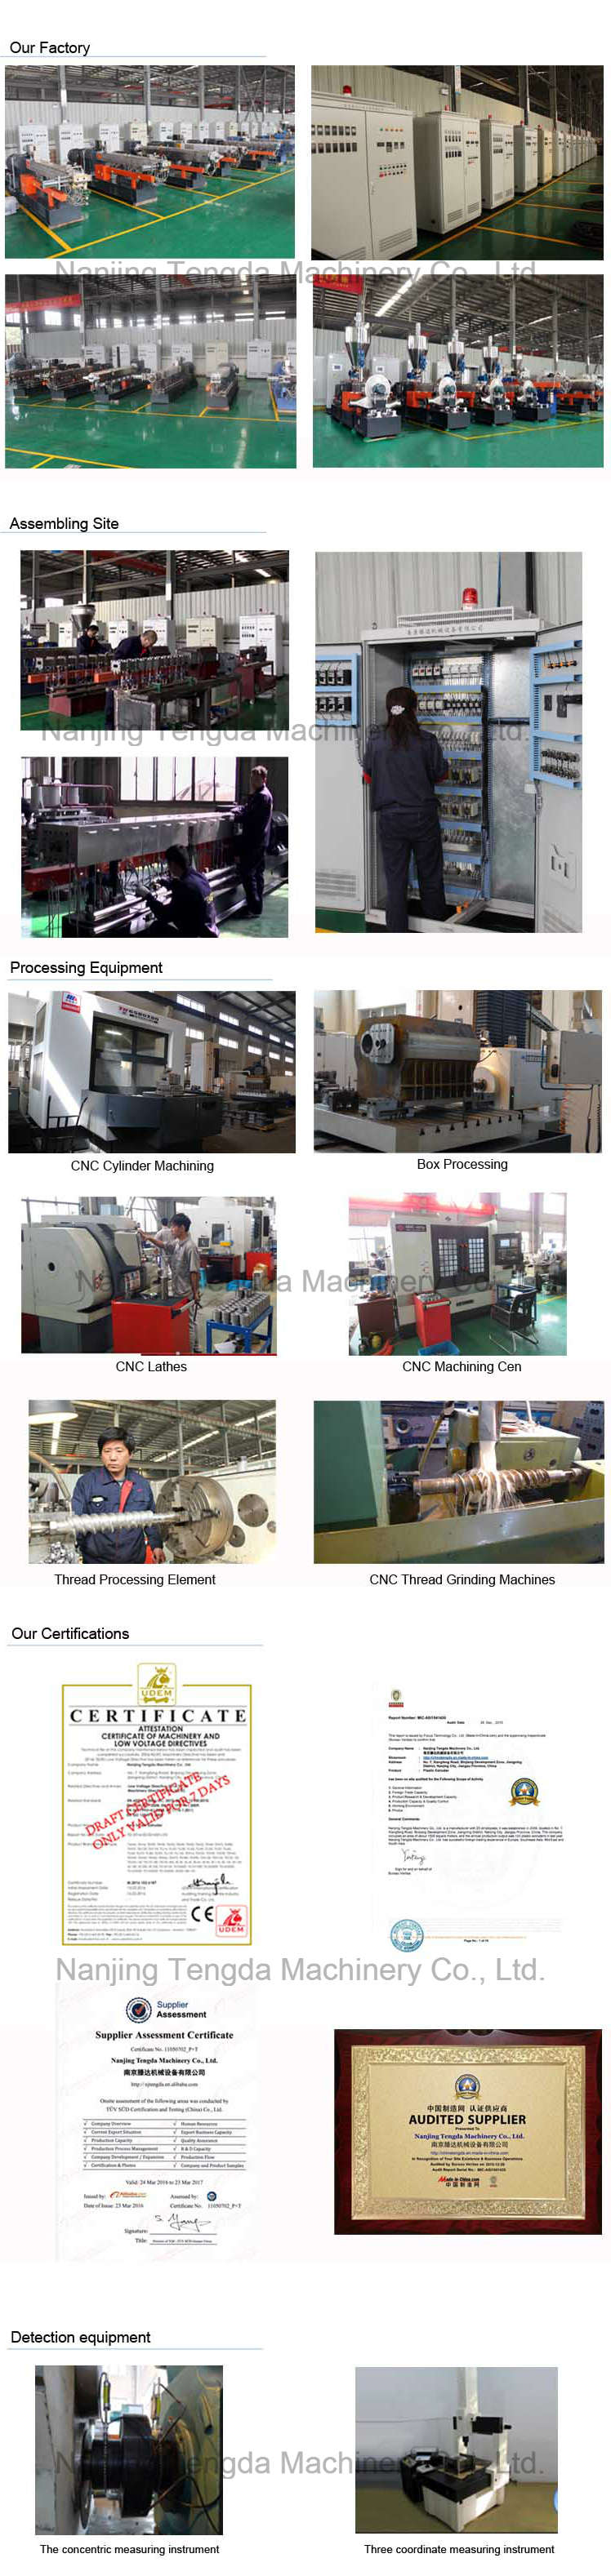 Co-Rotating Recycled Plastic Machine for Sale